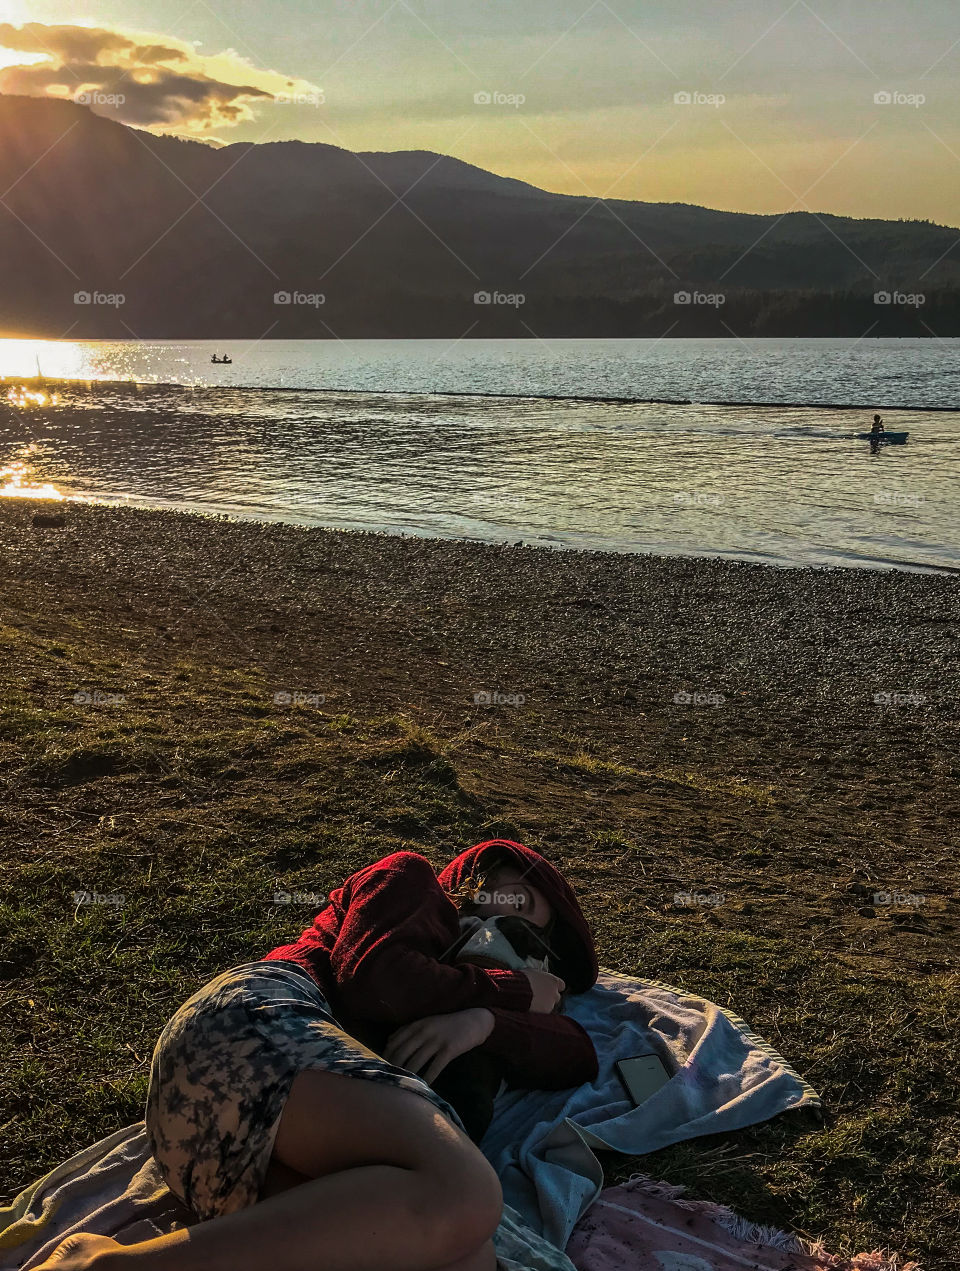 A summer afternoon at the lake stretched into evening as we enjoyed the setting sun. My daughter warmed the pup after we took her in the water to check out her life jacket. The water was cold that day but the gorgeous golden sun warmed us all. 🌄